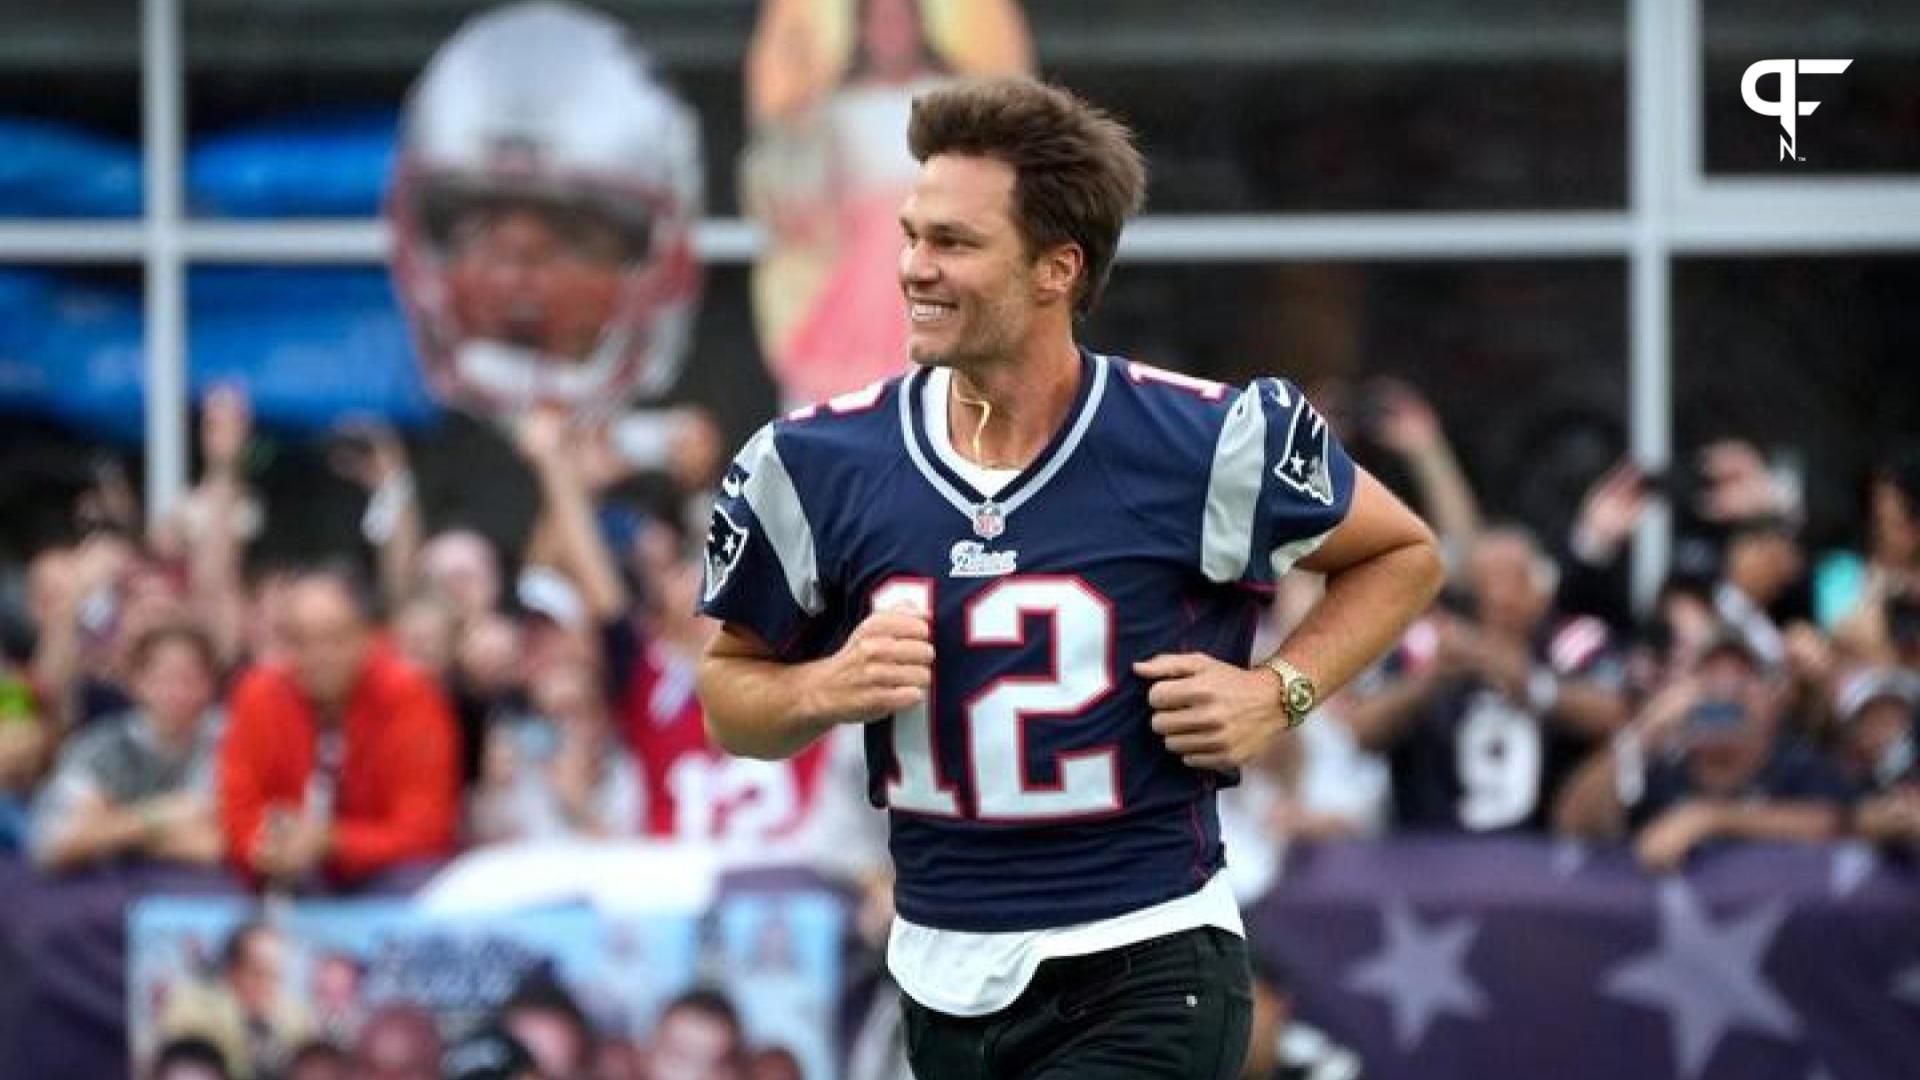 Former QB Tom Brady runs onto the field at Gillette Stadium before the team inducts him into the Patriots Hall of Fame.